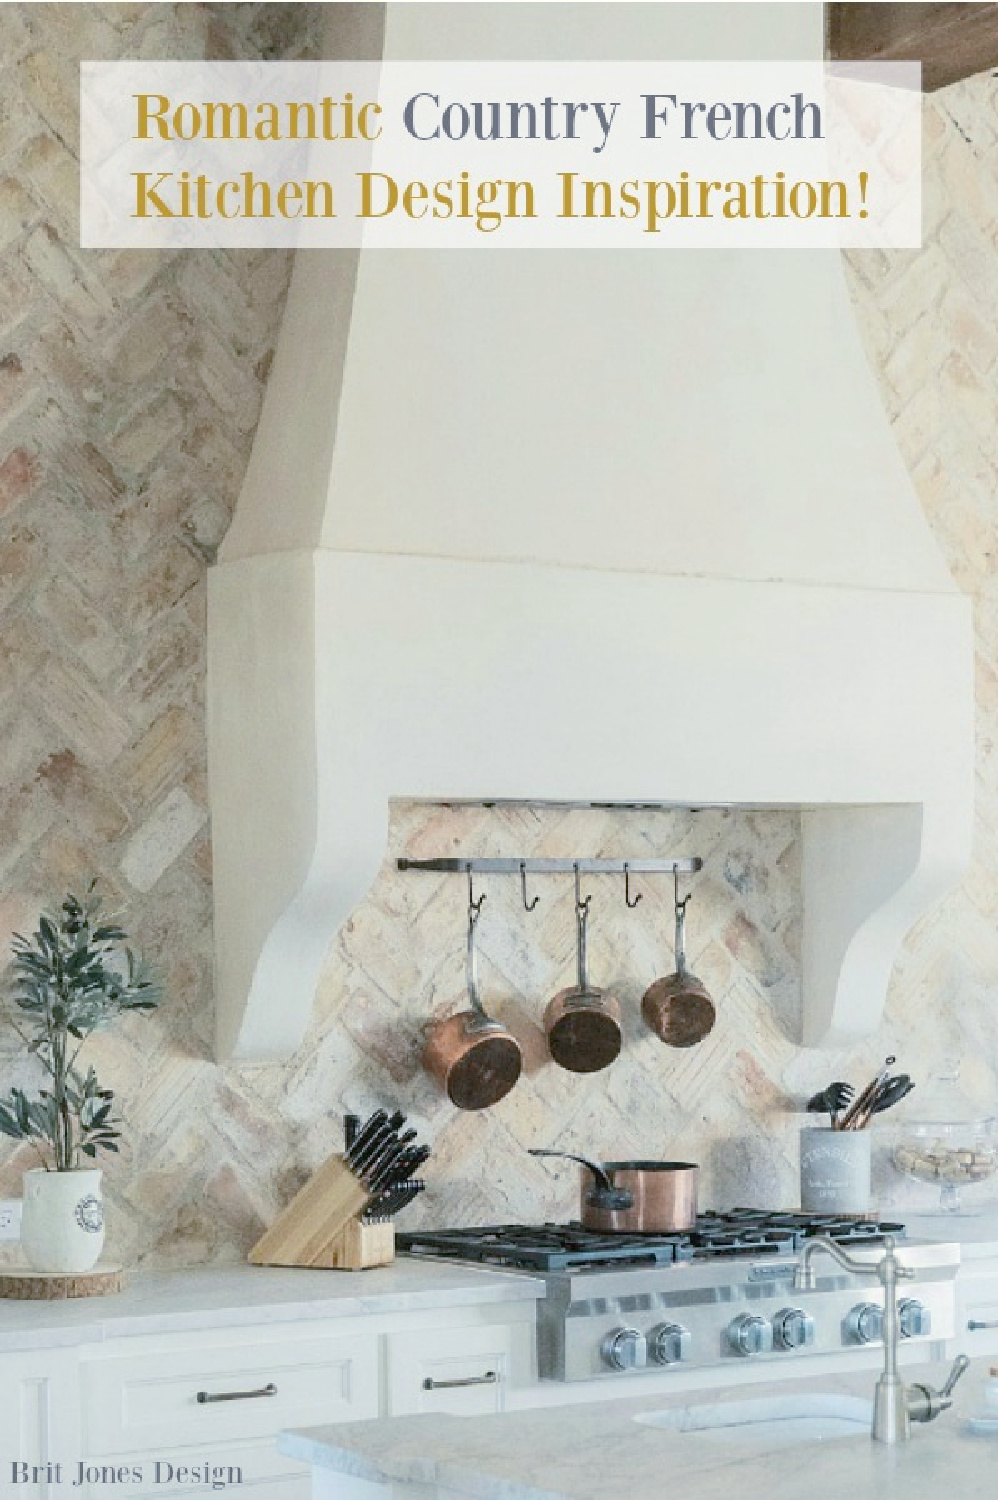 Chicago brick backsplash and custom French country range hood with copper pots on rack beneath in a country French kitchen by Brit Jones Design.